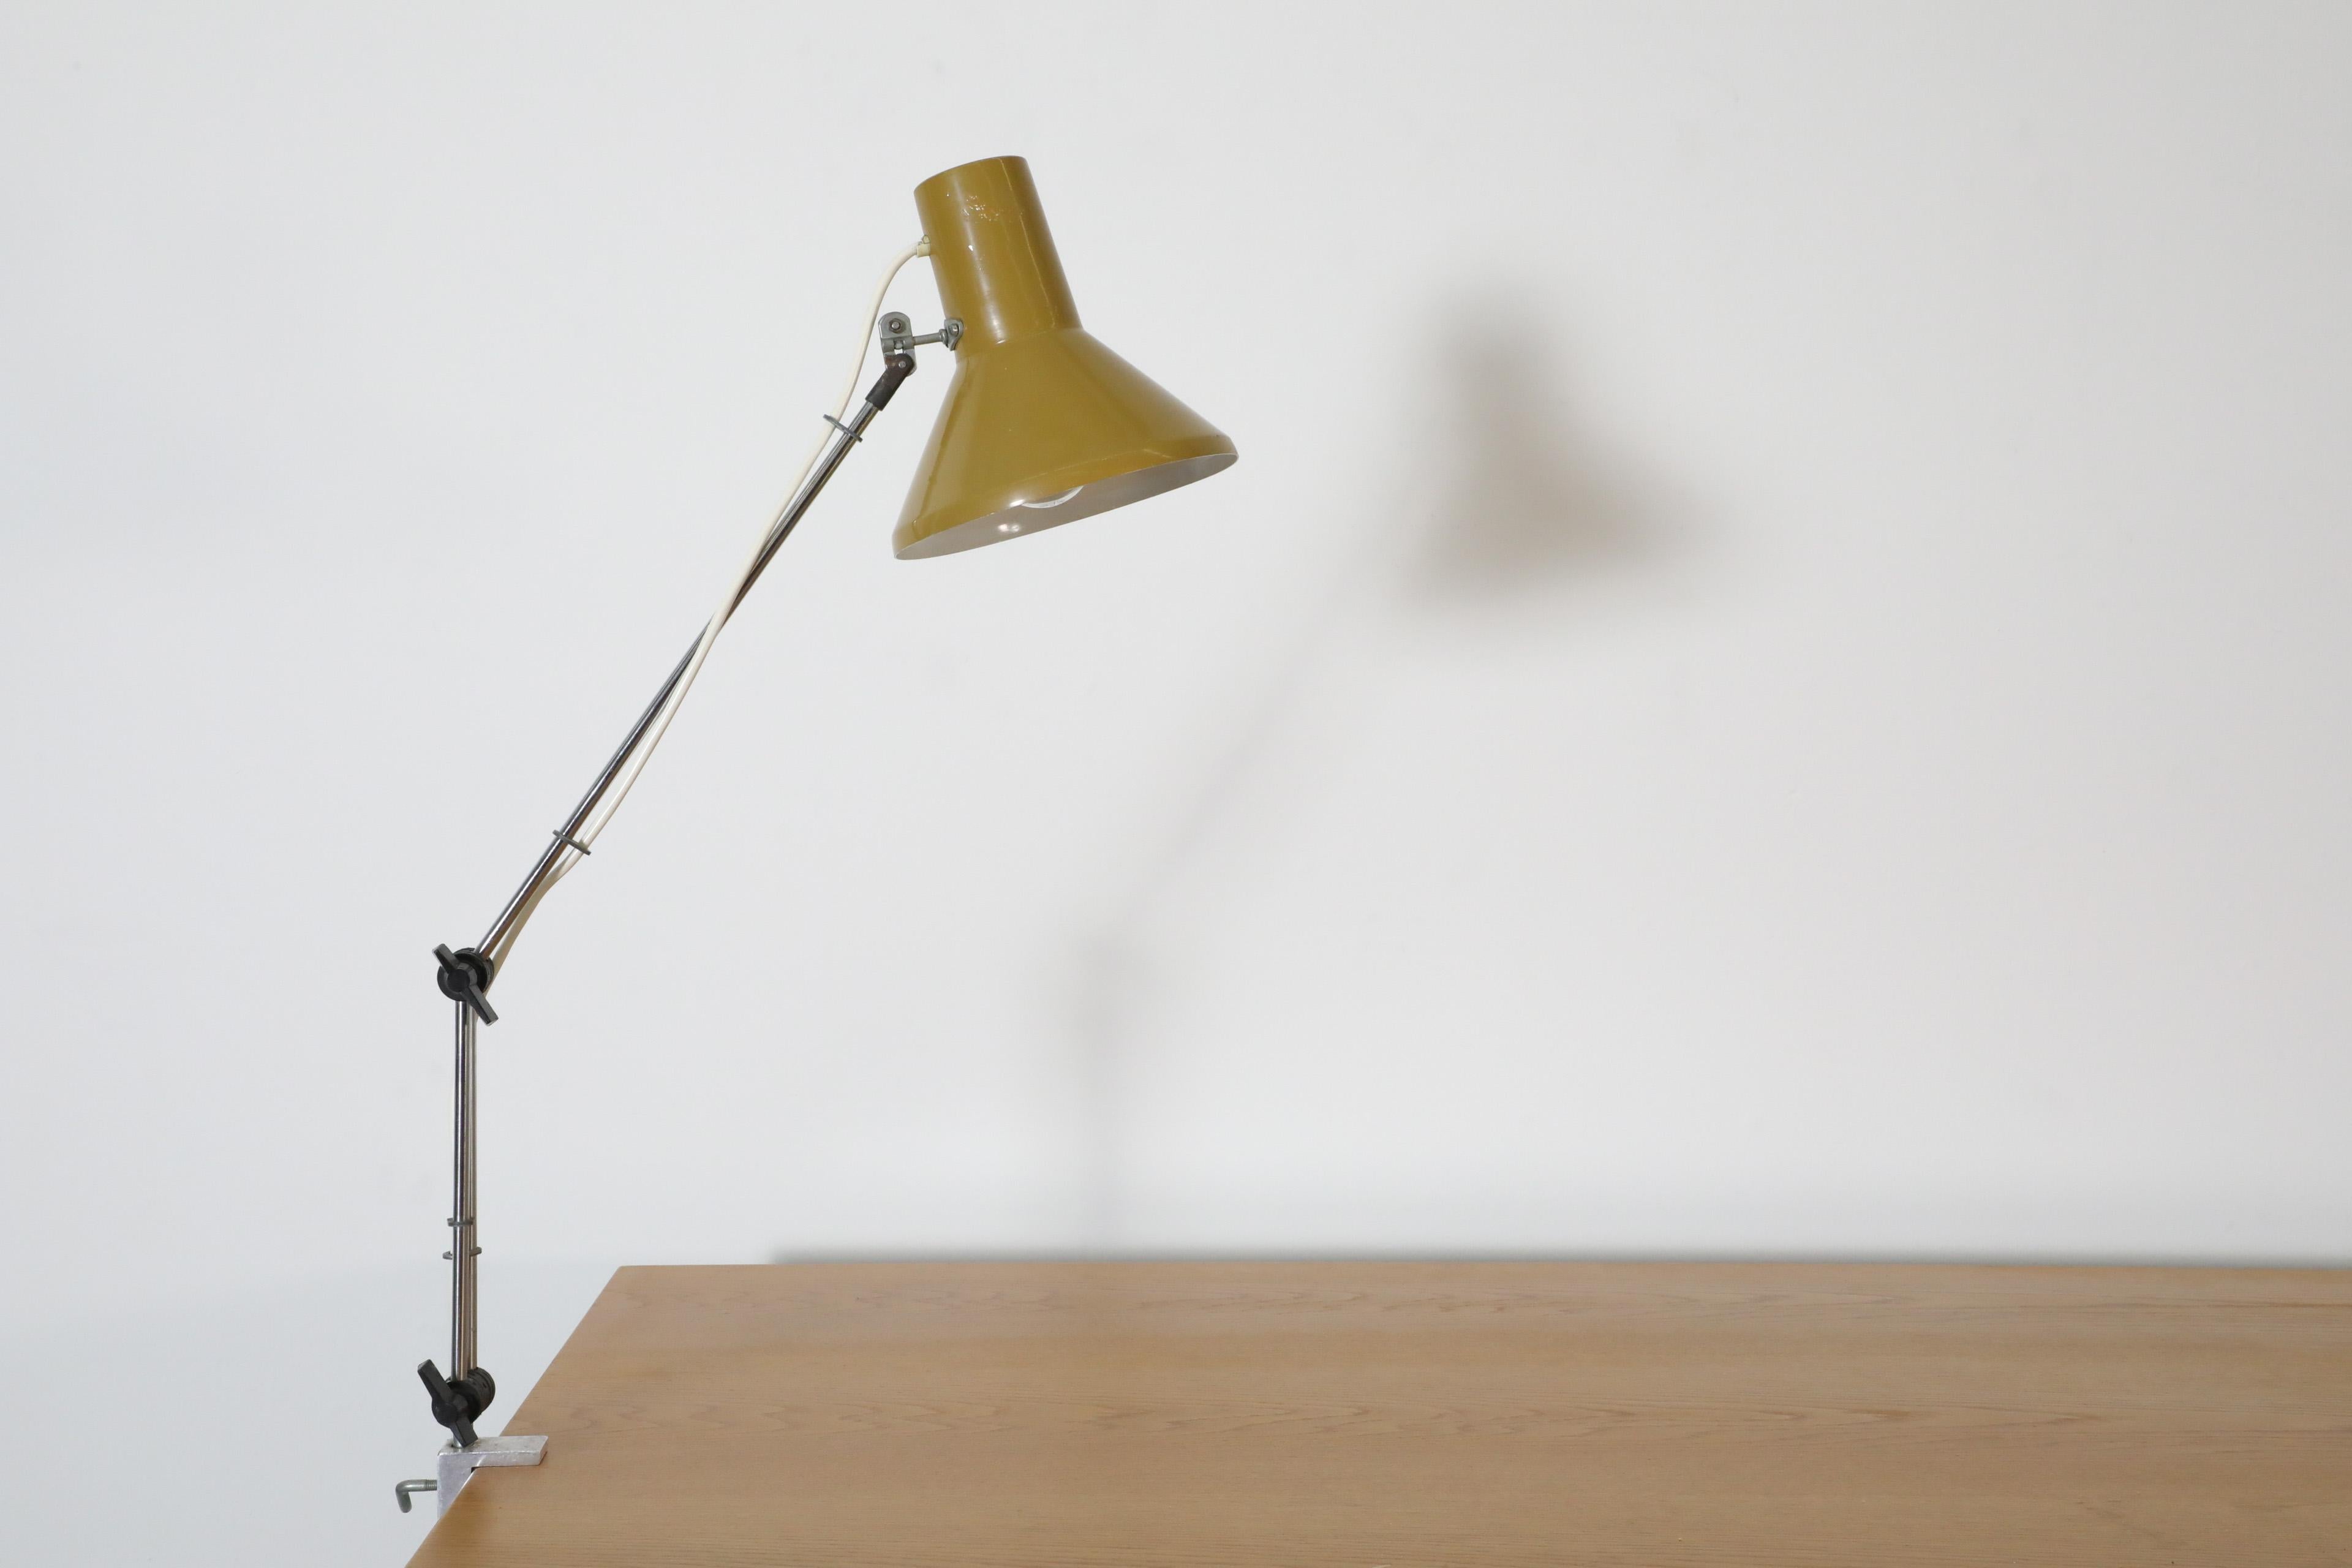 Mid-20th Century Szarvasi Hala Style Industrial Drafting Clamp-on Lamp with Olive Green Shade For Sale